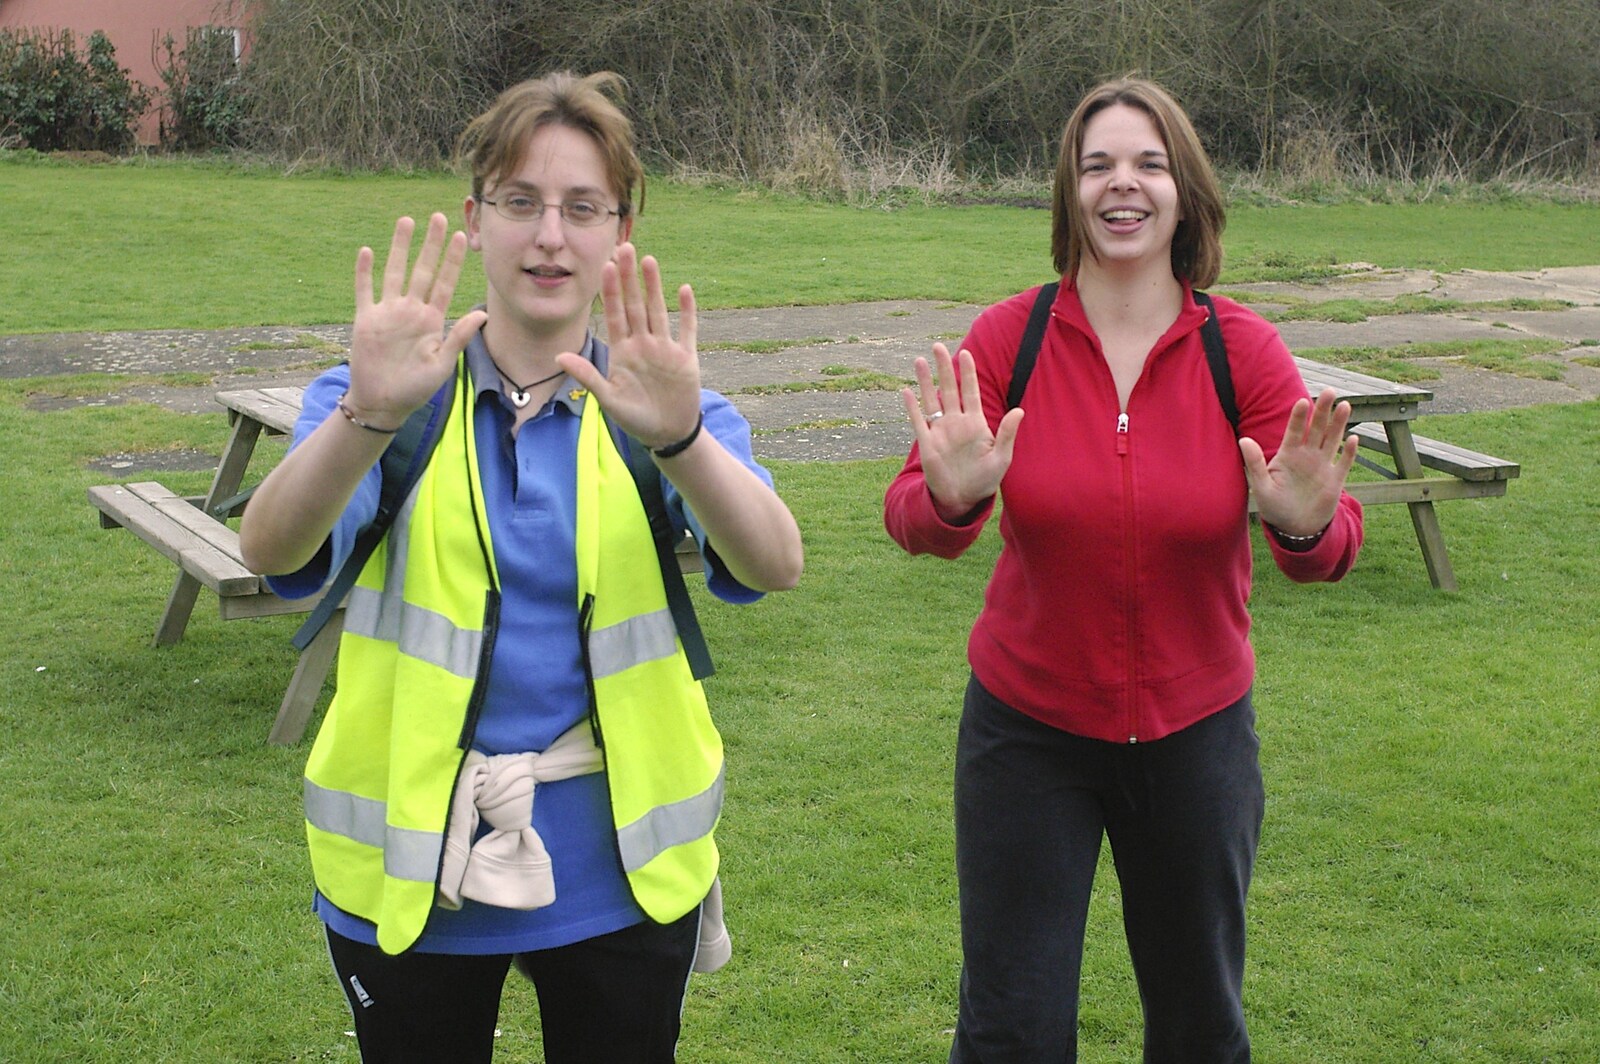 Suey and Jen show their hands from The BSCC Easter Bike Ride, Framlingham, Suffolk - 26th March 2005